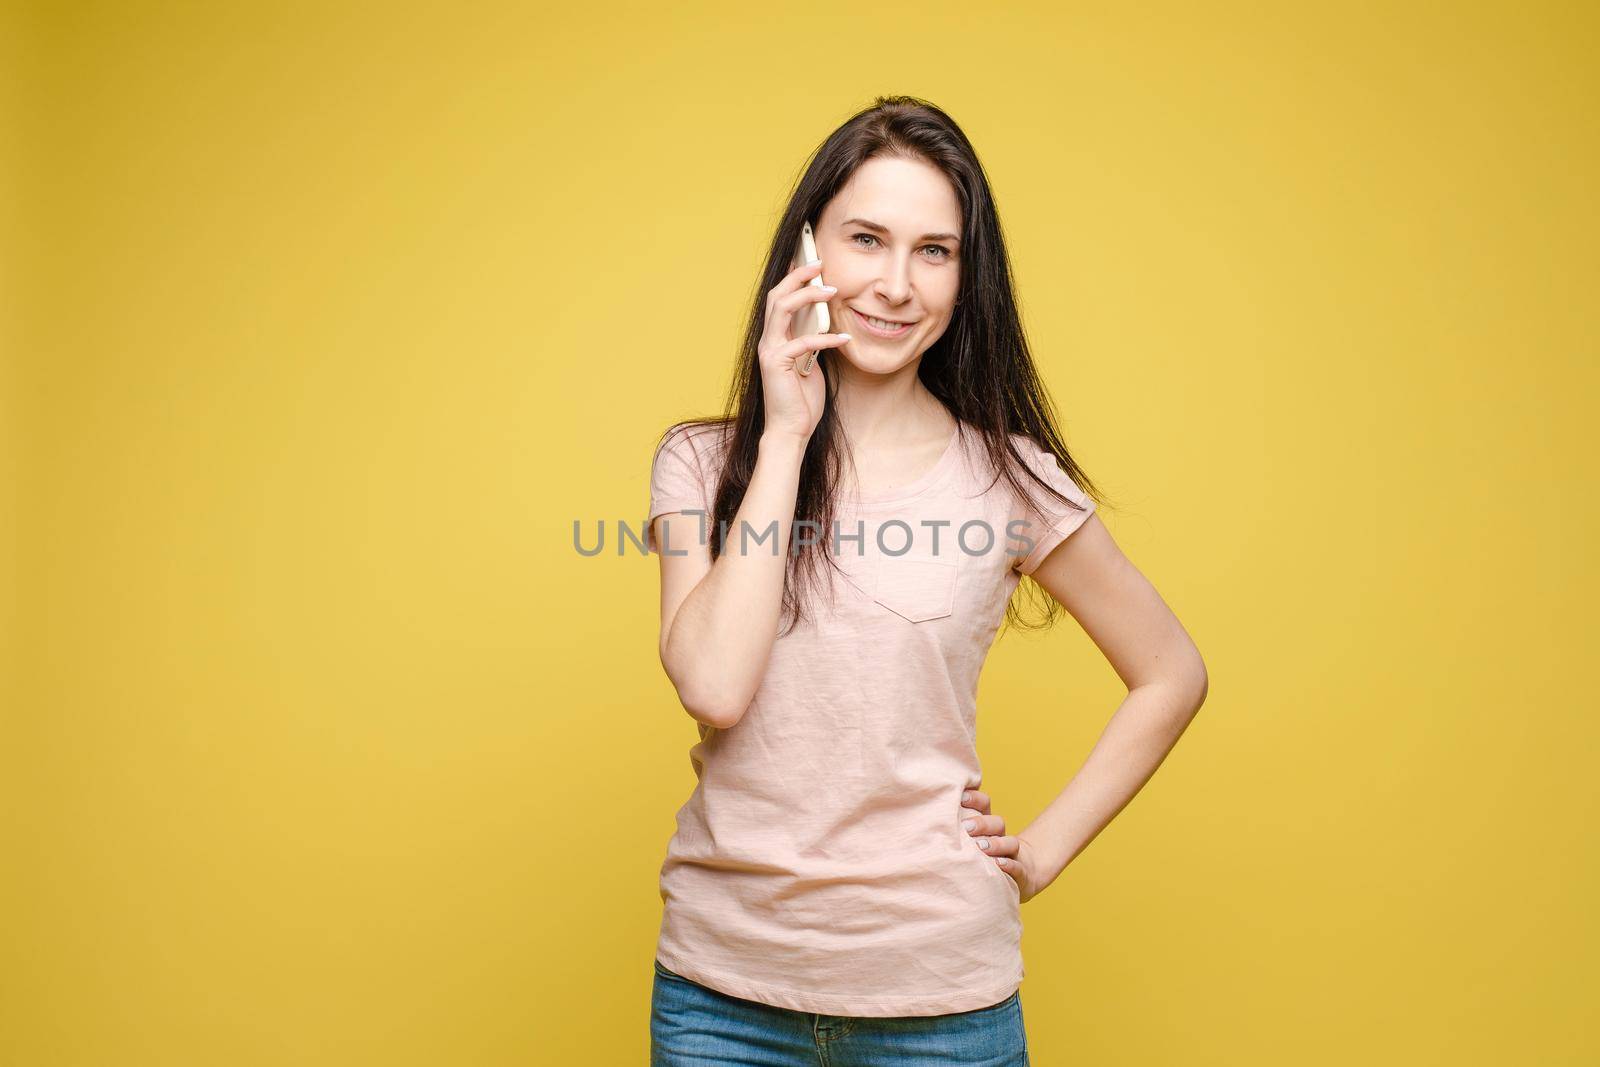 Stylish young girl in bright light dress talking by phone by StudioLucky